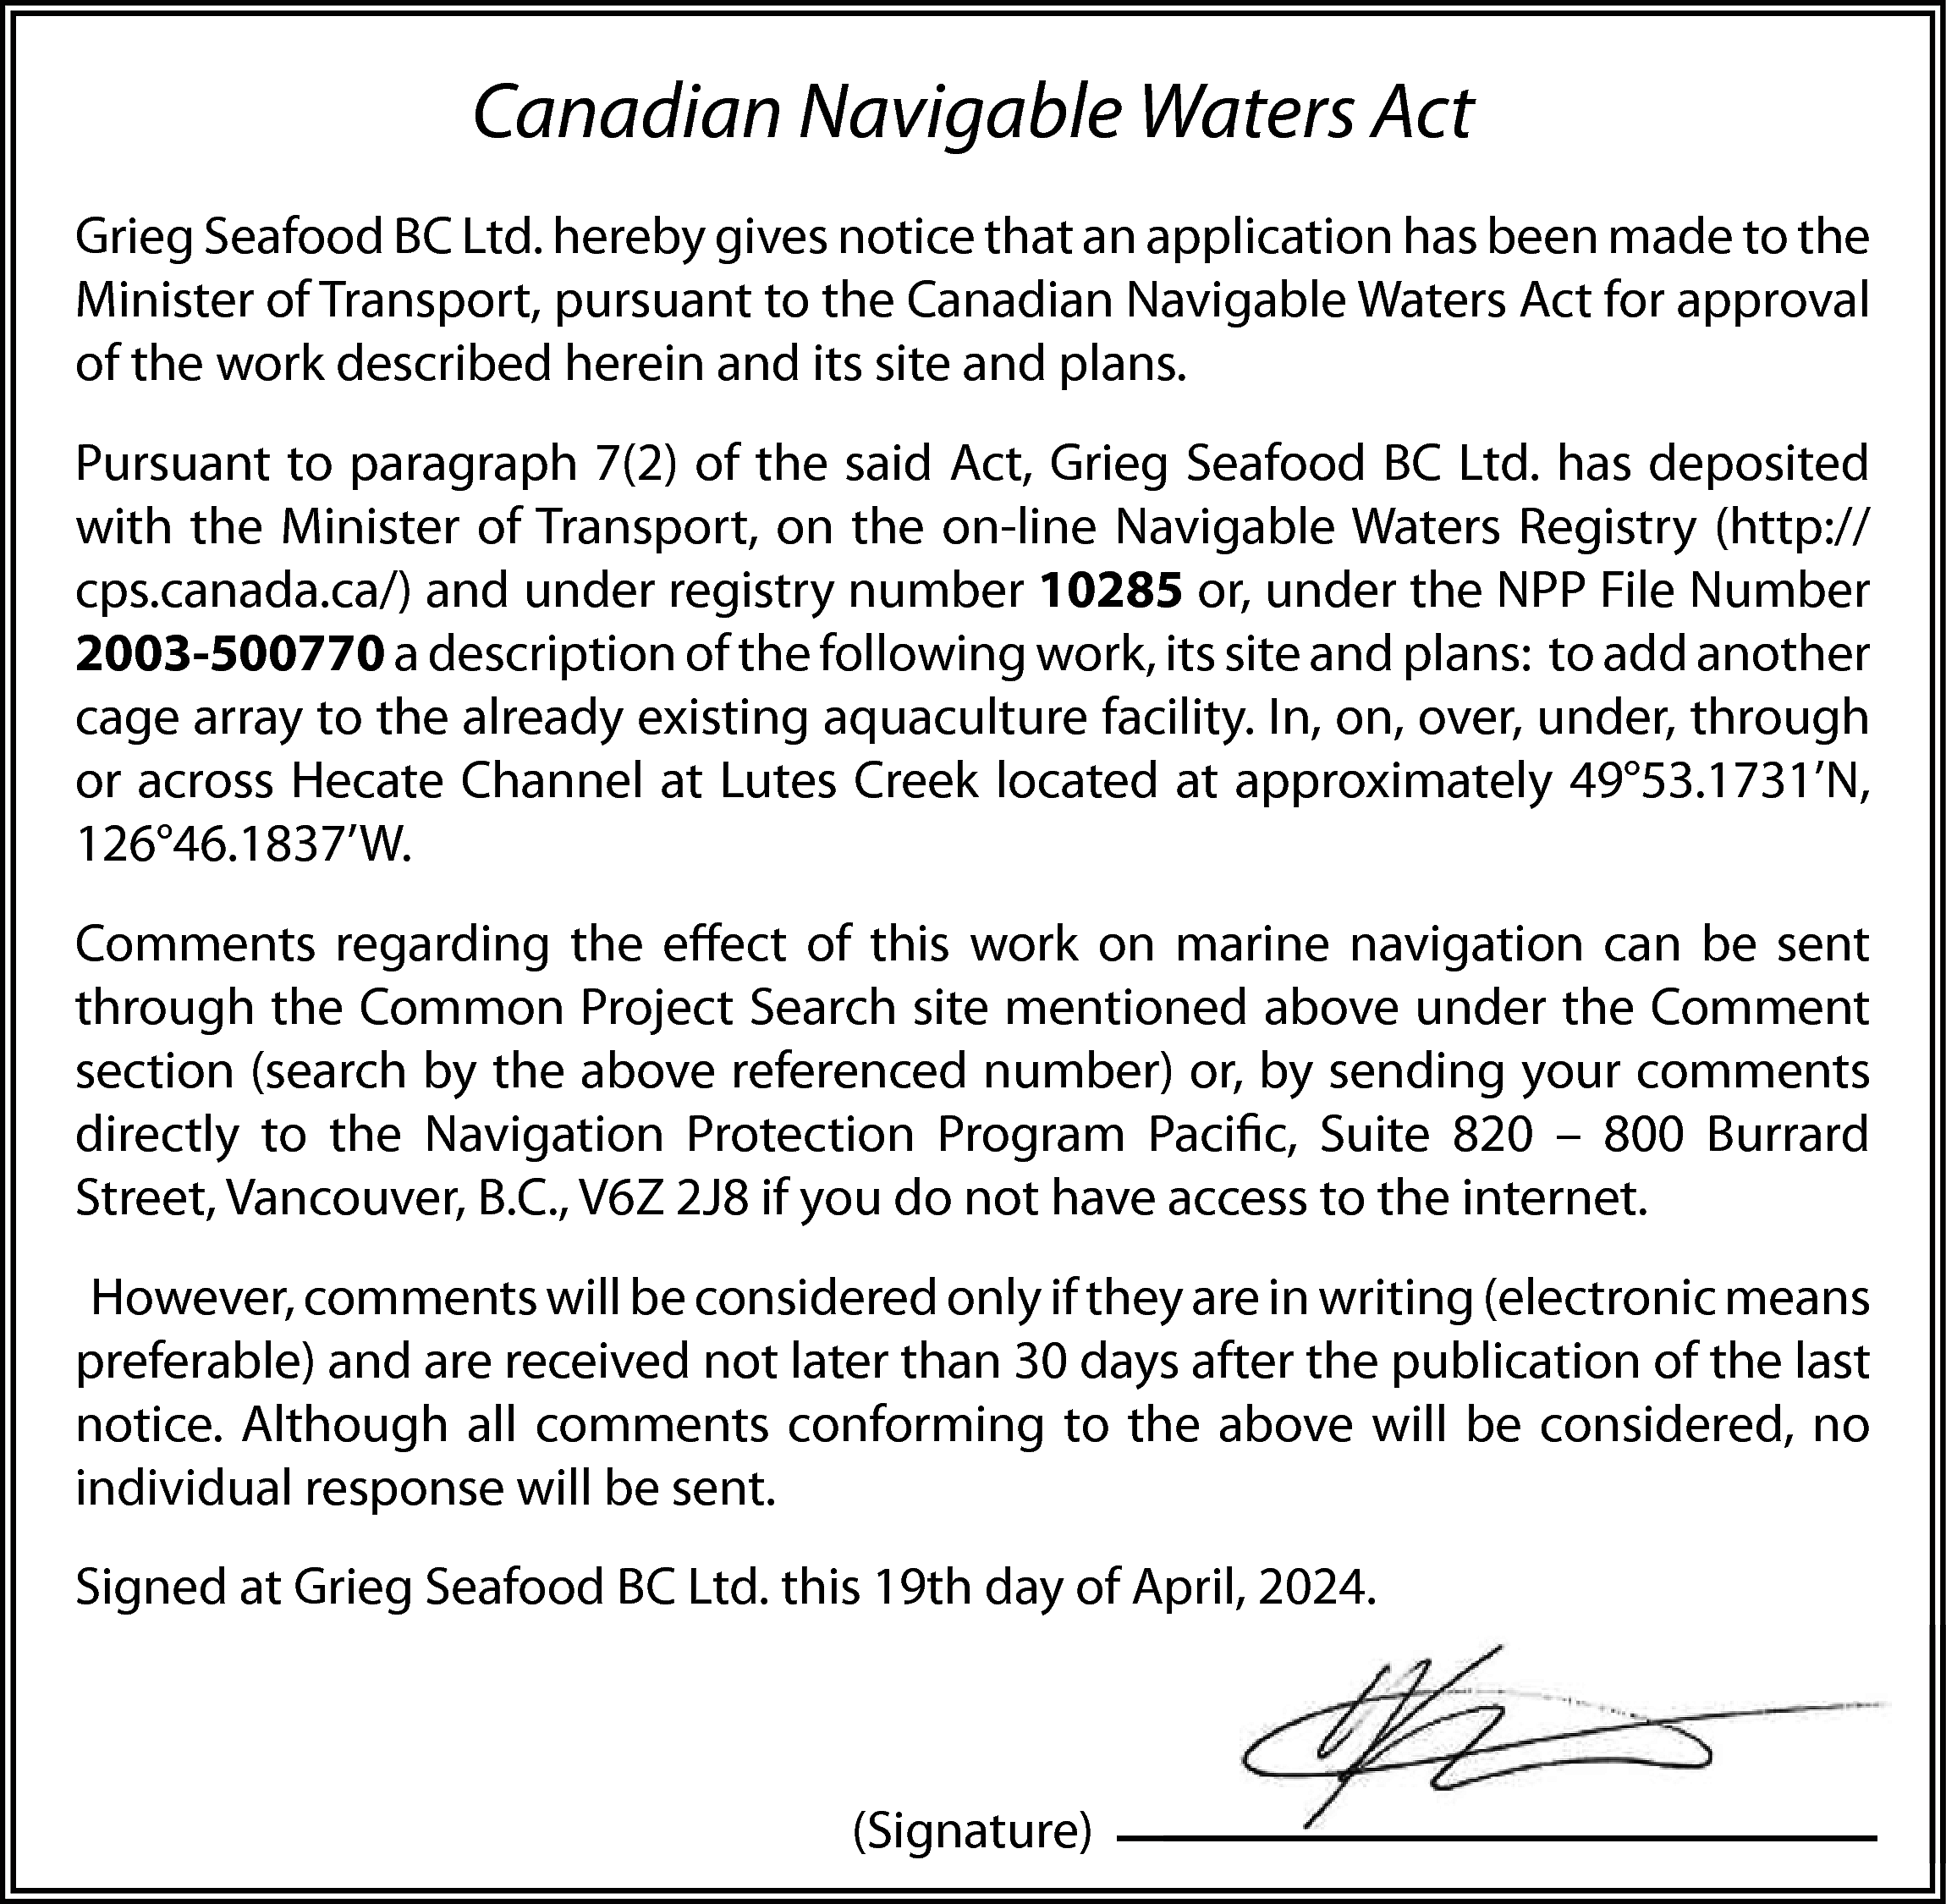 Canadian Navigable Waters Act <br>Grieg  Canadian Navigable Waters Act  Grieg Seafood BC Ltd. hereby gives notice that an application has been made to the  Minister of Transport, pursuant to the Canadian Navigable Waters Act for approval  of the work described herein and its site and plans.  Pursuant to paragraph 7(2) of the said Act, Grieg Seafood BC Ltd. has deposited  with the Minister of Transport, on the on-line Navigable Waters Registry (http://  cps.canada.ca/) and under registry number 10285 or, under the NPP File Number  2003-500770 a description of the following work, its site and plans: to add another  cage array to the already existing aquaculture facility. In, on, over, under, through  or across Hecate Channel at Lutes Creek located at approximately 49°53.1731’N,  126°46.1837’W.  Comments regarding the effect of this work on marine navigation can be sent  through the Common Project Search site mentioned above under the Comment  section (search by the above referenced number) or, by sending your comments  directly to the Navigation Protection Program Pacific, Suite 820 – 800 Burrard  Street, Vancouver, B.C., V6Z 2J8 if you do not have access to the internet.  However, comments will be considered only if they are in writing (electronic means  preferable) and are received not later than 30 days after the publication of the last  notice. Although all comments conforming to the above will be considered, no  individual response will be sent.  Signed at Grieg Seafood BC Ltd. this 19th day of April, 2024.    (Signature)    